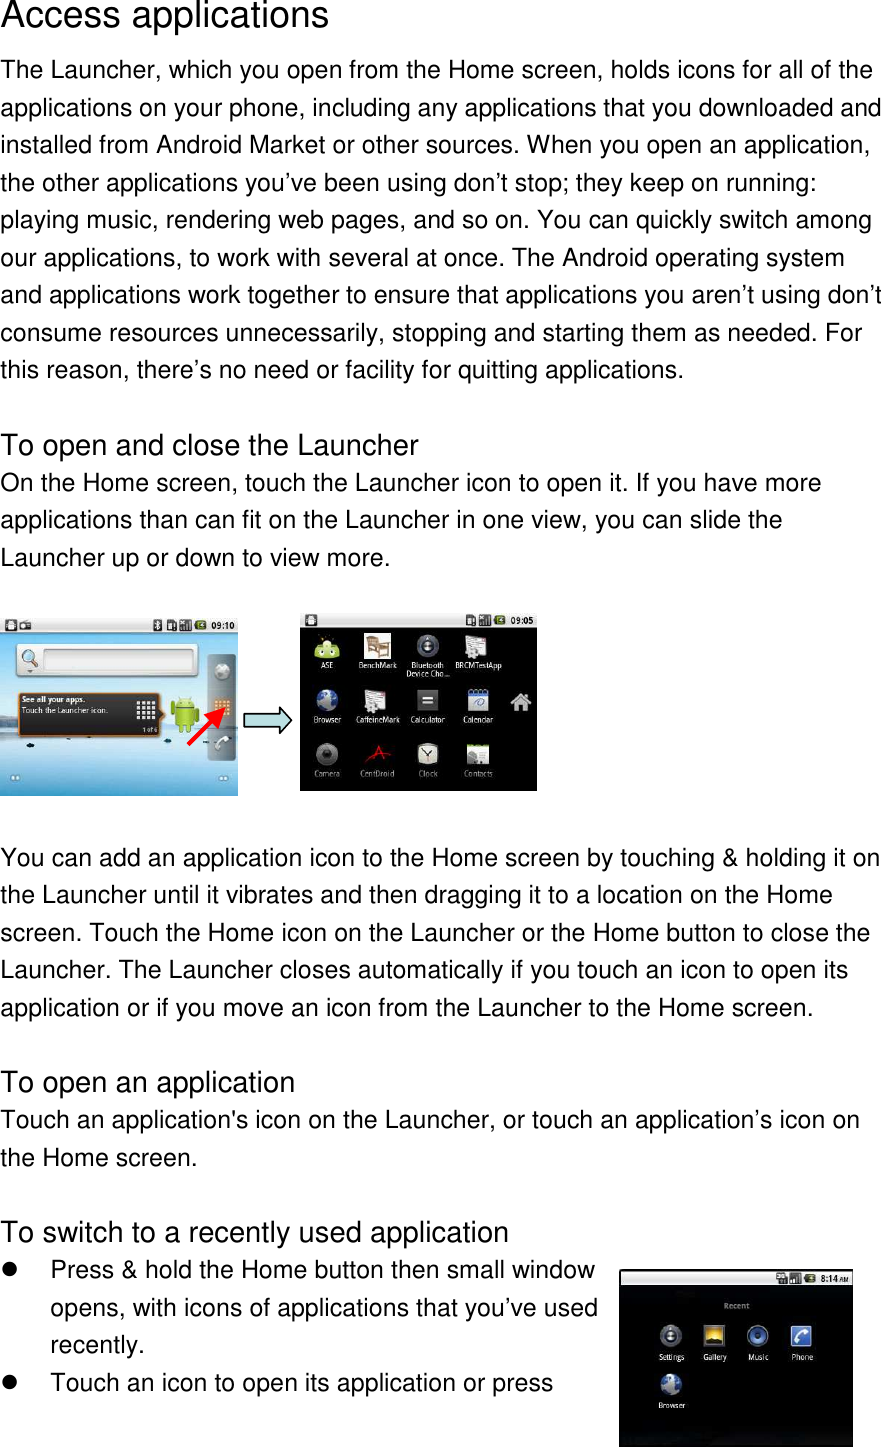 Access applications The Launcher, which you open from the Home screen, holds icons for all of the applications on your phone, including any applications that you downloaded and installed from Android Market or other sources. When you open an application, the other applications you’ve been using don’t stop; they keep on running: playing music, rendering web pages, and so on. You can quickly switch among our applications, to work with several at once. The Android operating system and applications work together to ensure that applications you aren’t using don’t consume resources unnecessarily, stopping and starting them as needed. For this reason, there’s no need or facility for quitting applications.  To open and close the Launcher On the Home screen, touch the Launcher icon to open it. If you have more applications than can fit on the Launcher in one view, you can slide the Launcher up or down to view more.    You can add an application icon to the Home screen by touching &amp; holding it on the Launcher until it vibrates and then dragging it to a location on the Home screen. Touch the Home icon on the Launcher or the Home button to close the Launcher. The Launcher closes automatically if you touch an icon to open its application or if you move an icon from the Launcher to the Home screen.  To open an application Touch an application&apos;s icon on the Launcher, or touch an application’s icon on the Home screen.  To switch to a recently used application   Press &amp; hold the Home button then small window opens, with icons of applications that you’ve used recently.   Touch an icon to open its application or press 